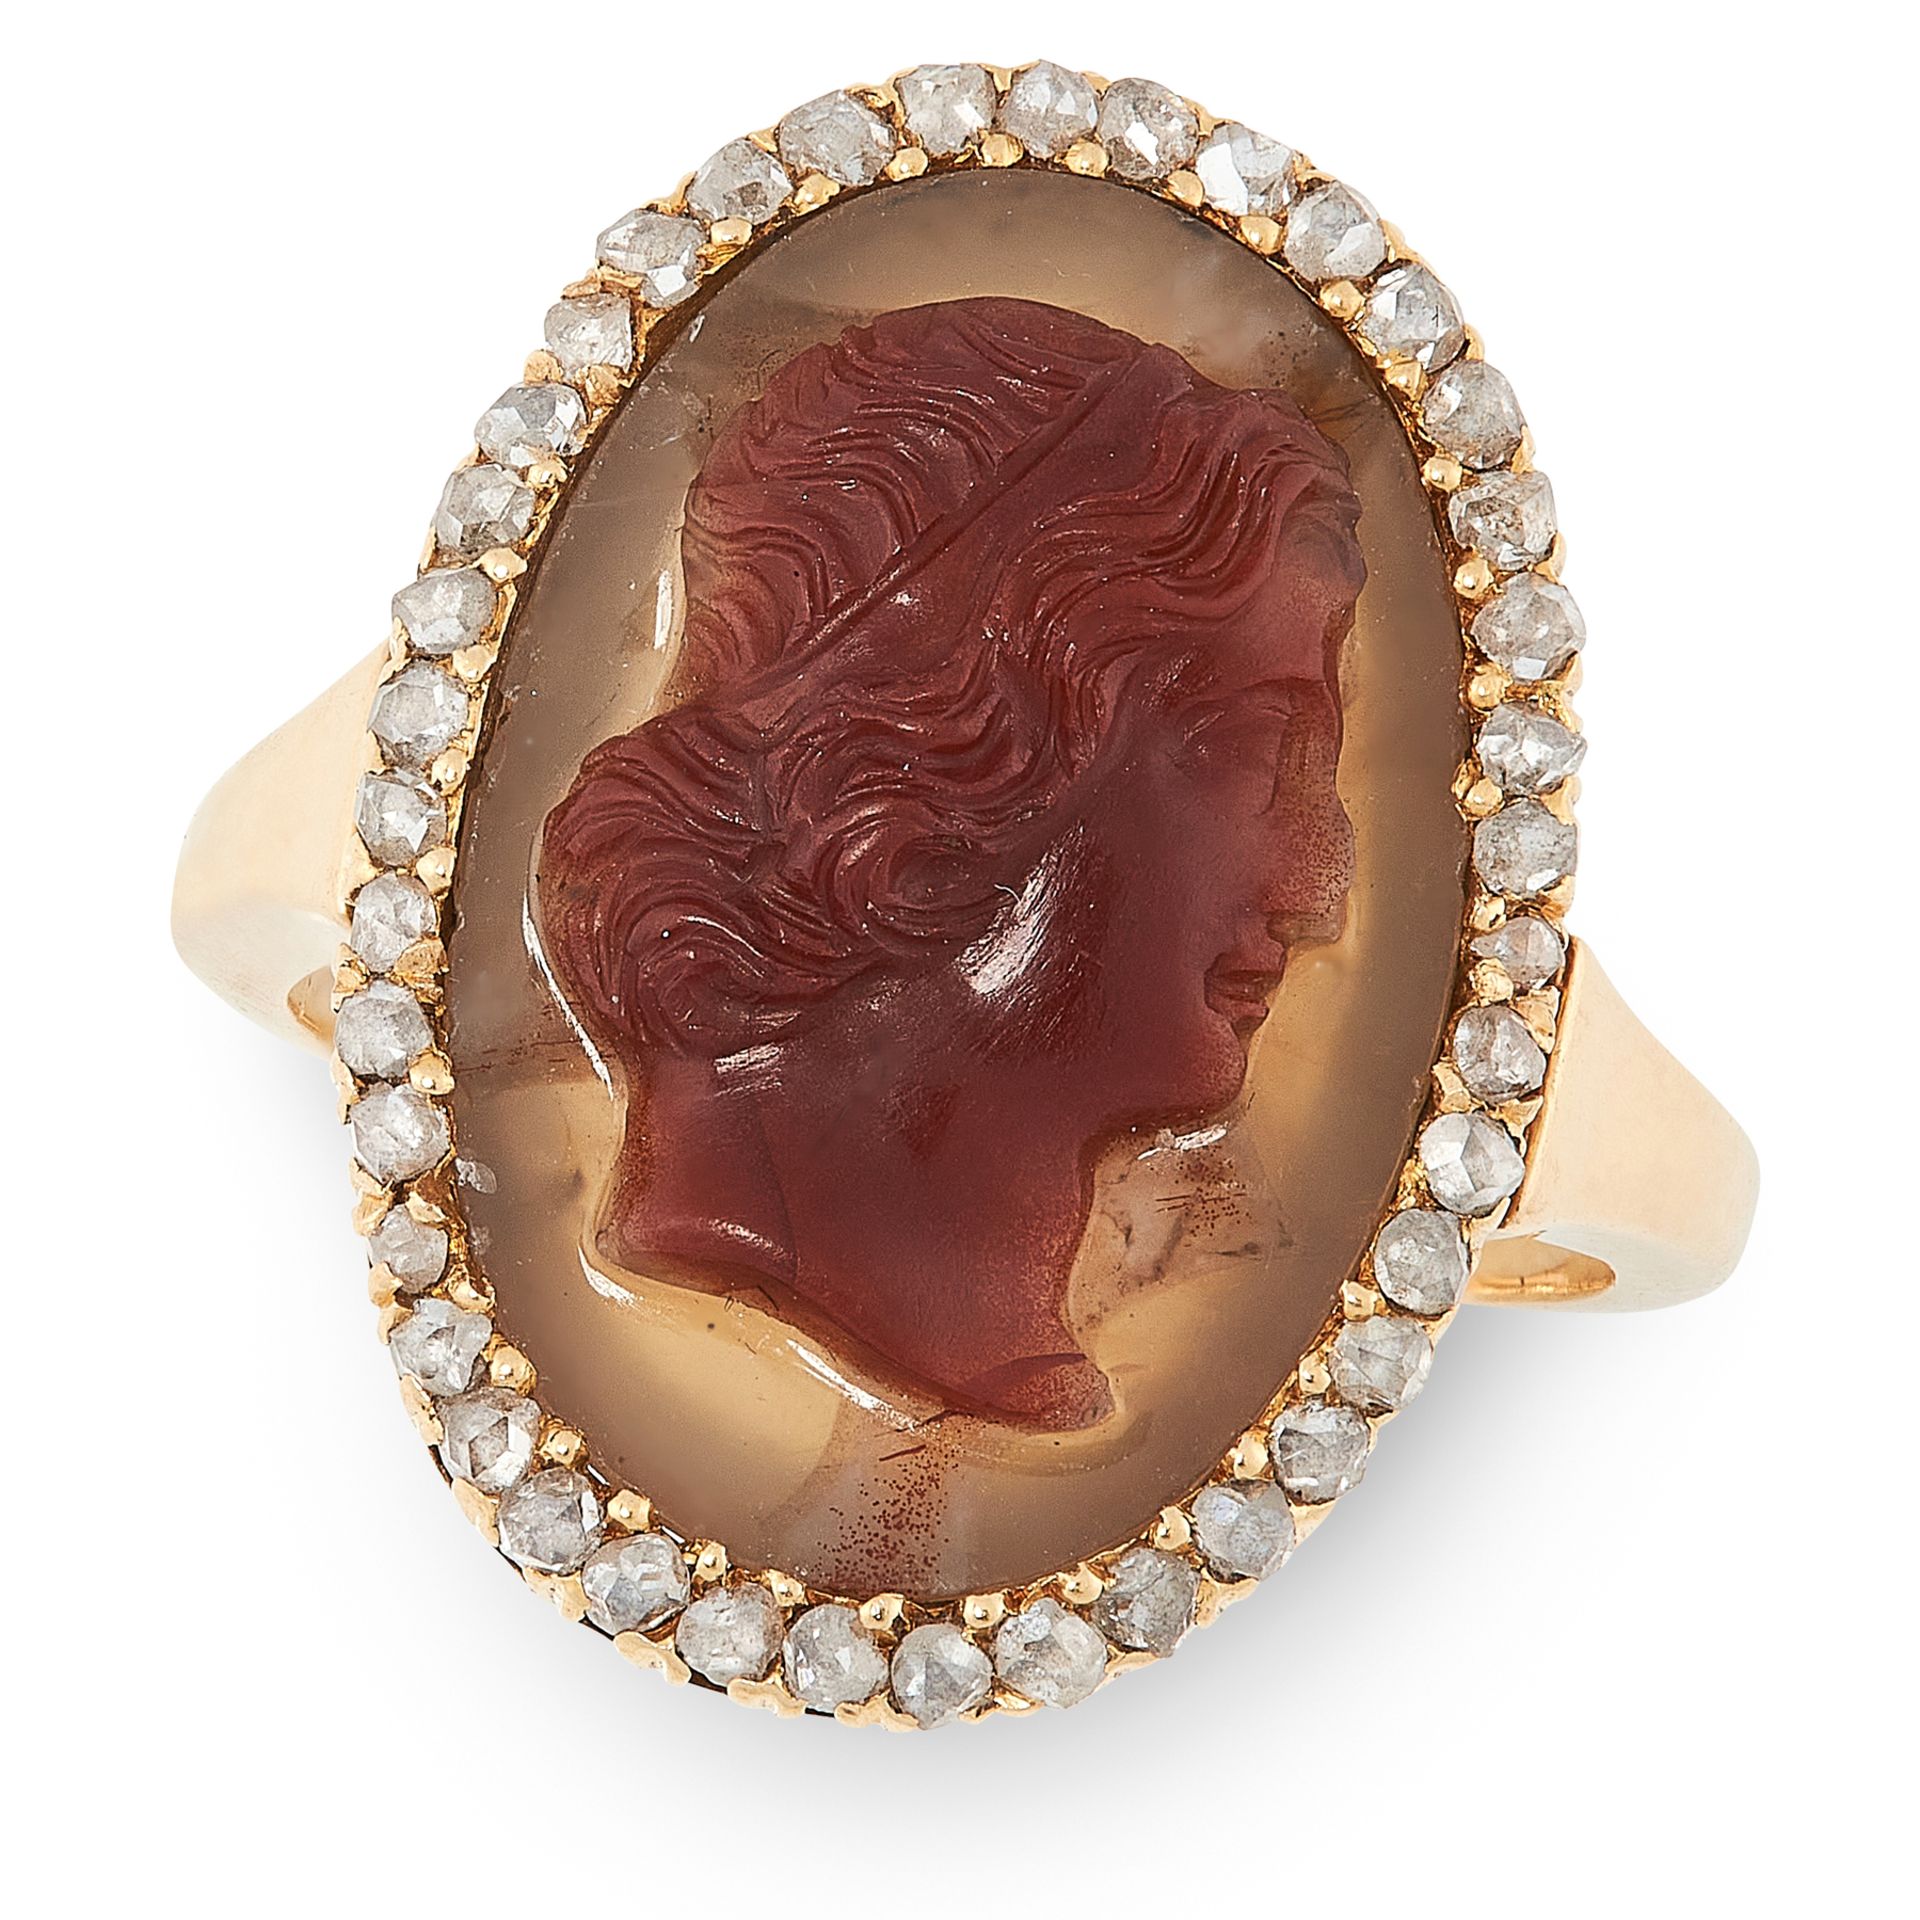 AN ANTIQUE CARVED AGATE INTAGLIO AND DIAMOND RING in yellow gold, set with an oval carved agate